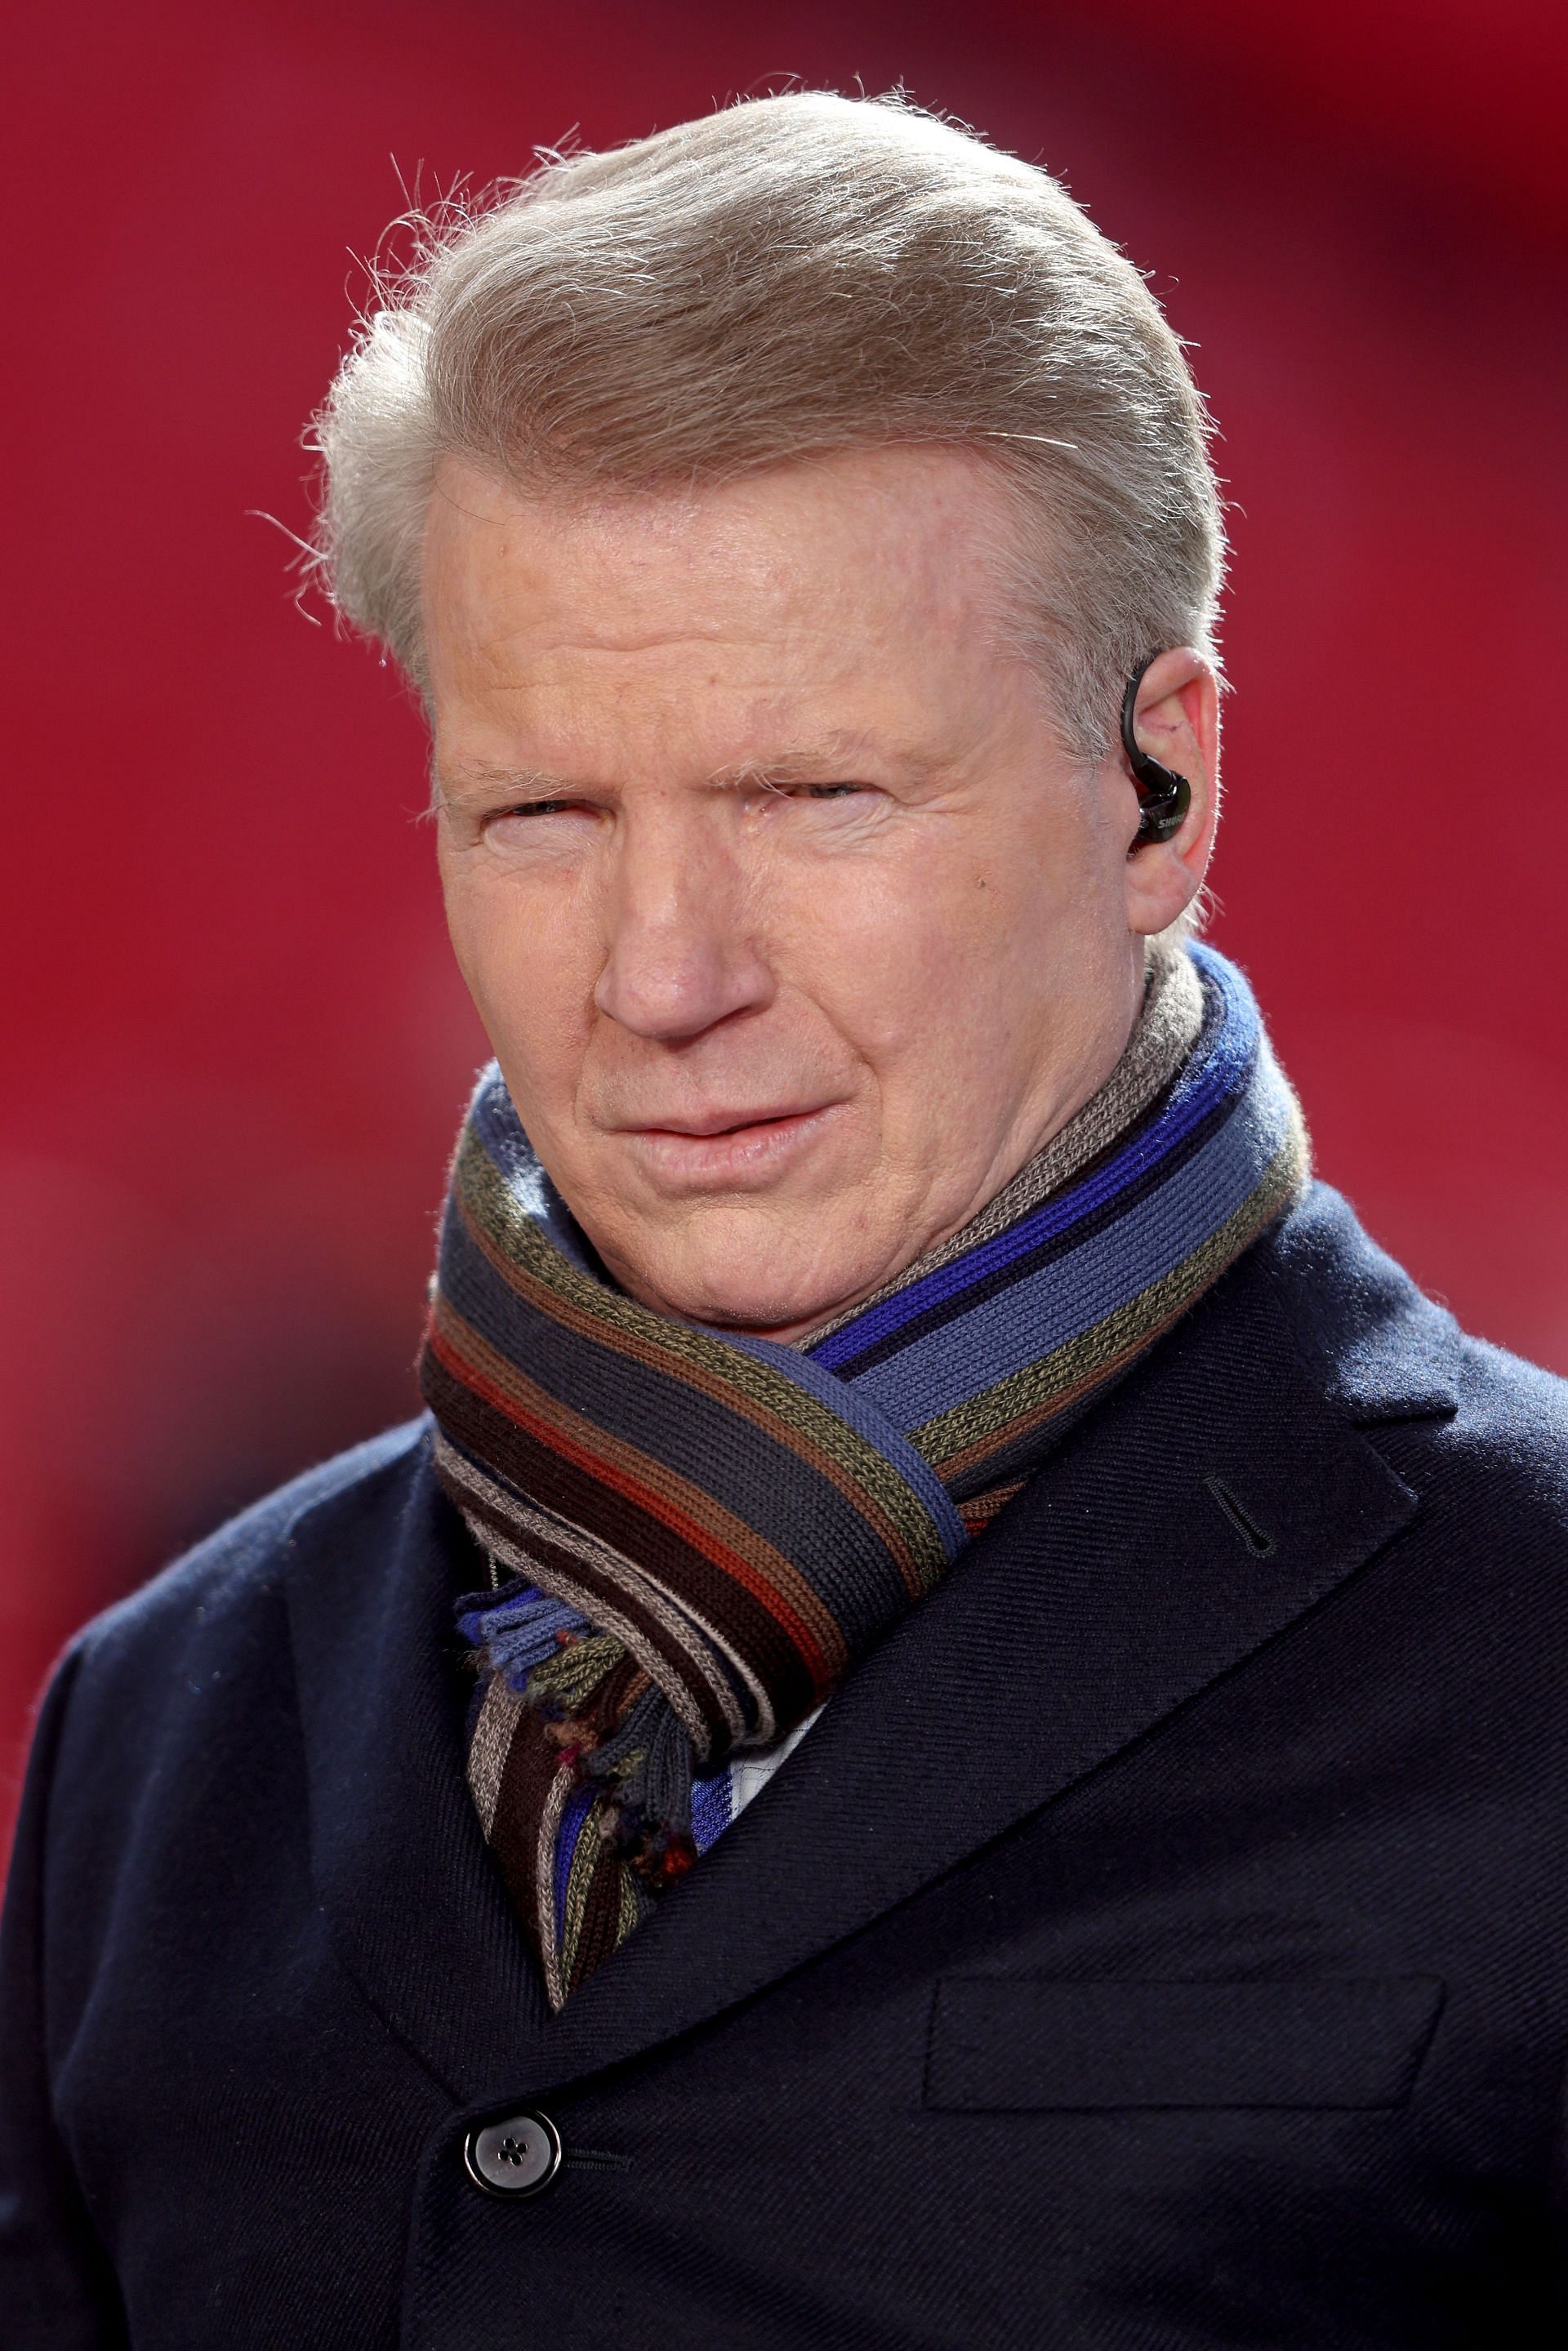 Giants QB Phil Simms who first said &quot;I&#039;m going to Disney World&quot;